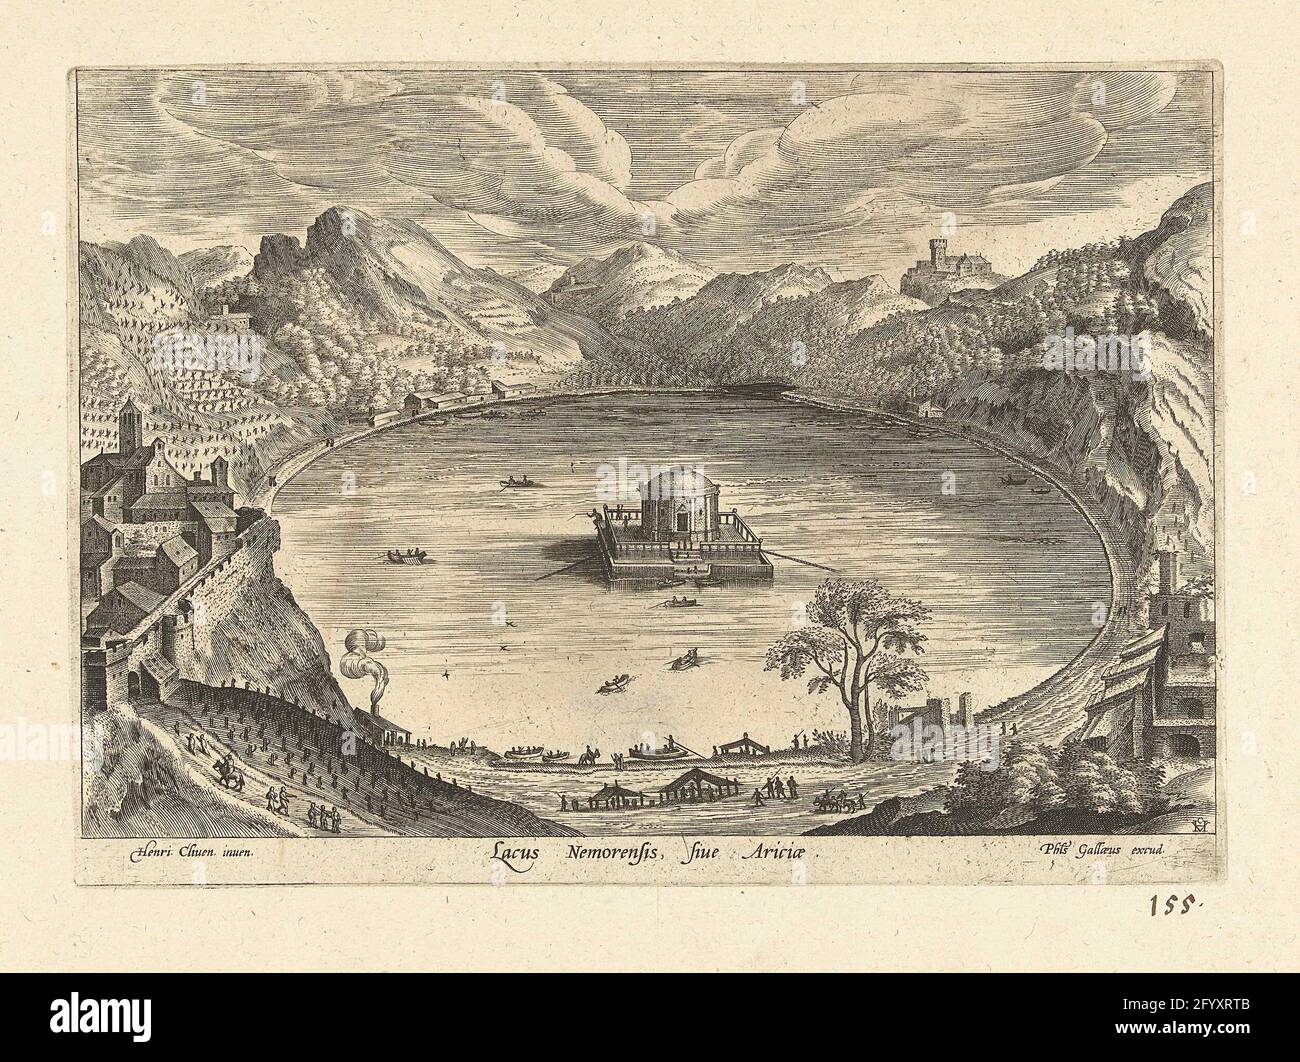 View of the Nemi lake; Lacus Nemorensis, Sive Ariciae; Ruinarum Varii Prospectus. View of the Nemi lake with a temple in the middle of the lake. On the lake some ships. The print is part of a series that depicts different places in the Mediterranean. Stock Photo